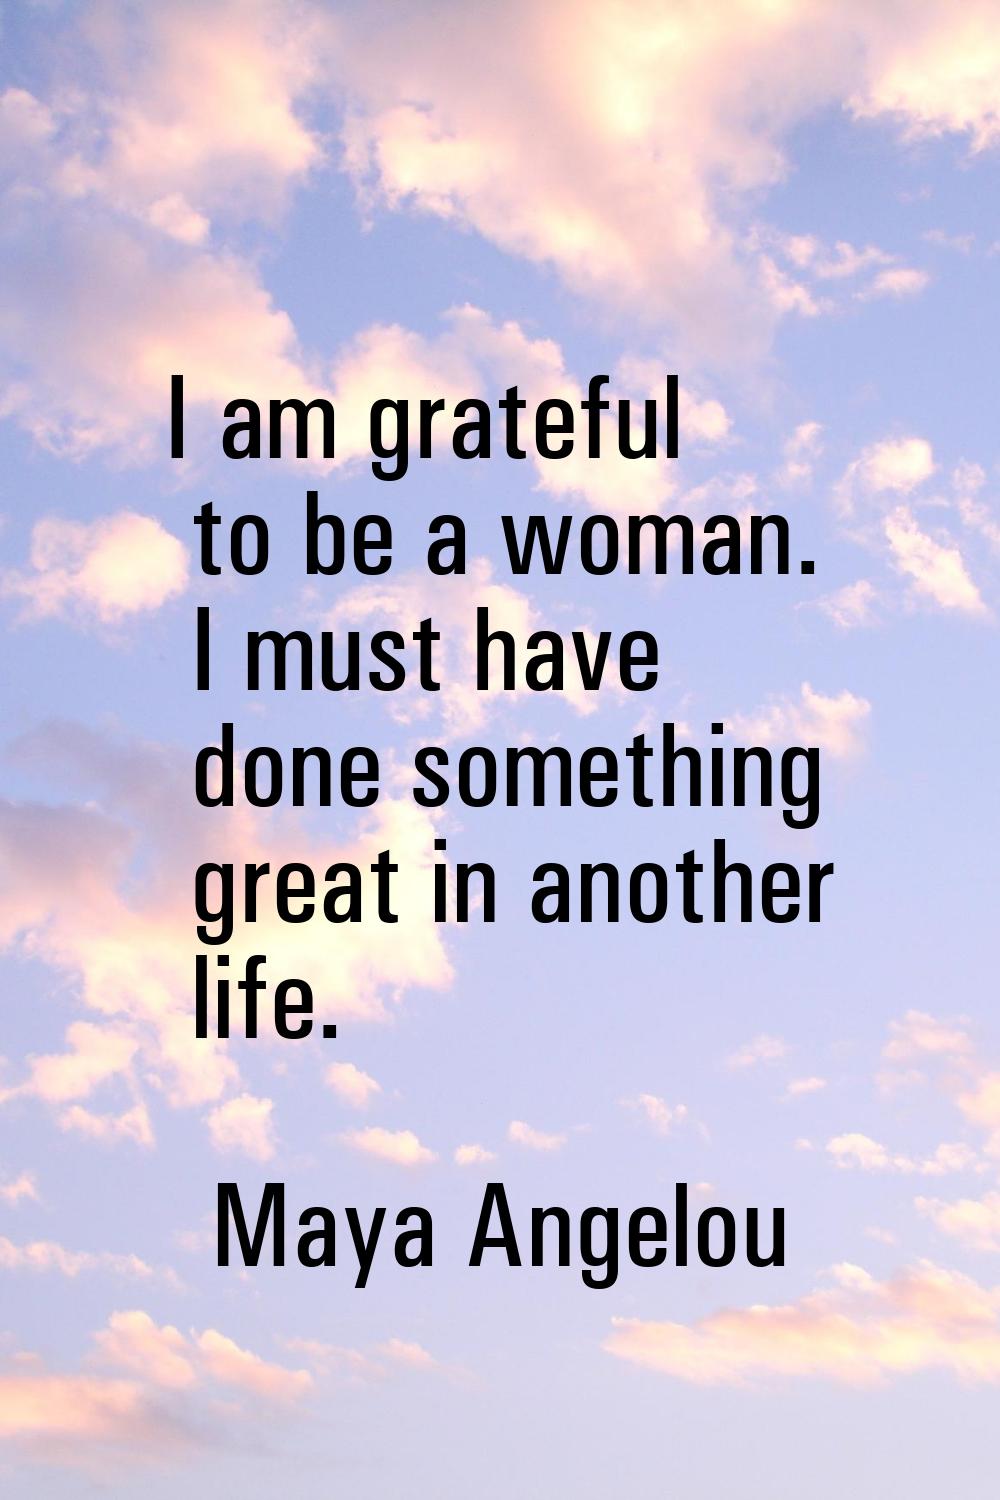 I am grateful to be a woman. I must have done something great in another life.